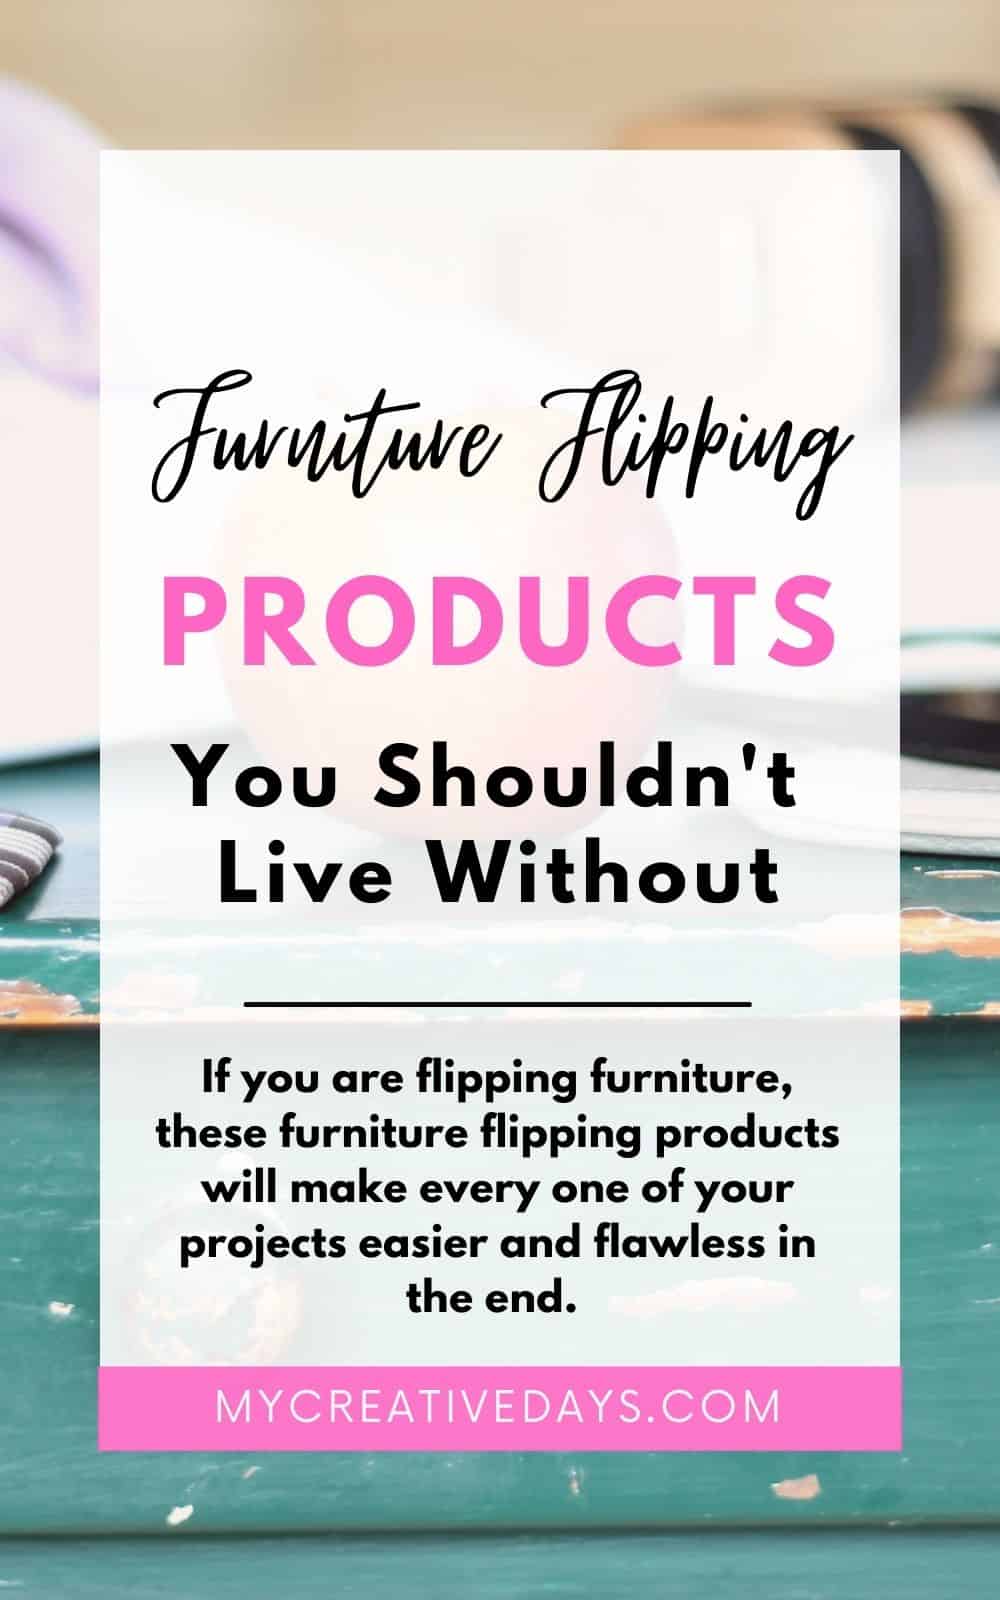 If you are flipping furniture, these furniture flipping products will make every one of your projects easier and flawless in the end.